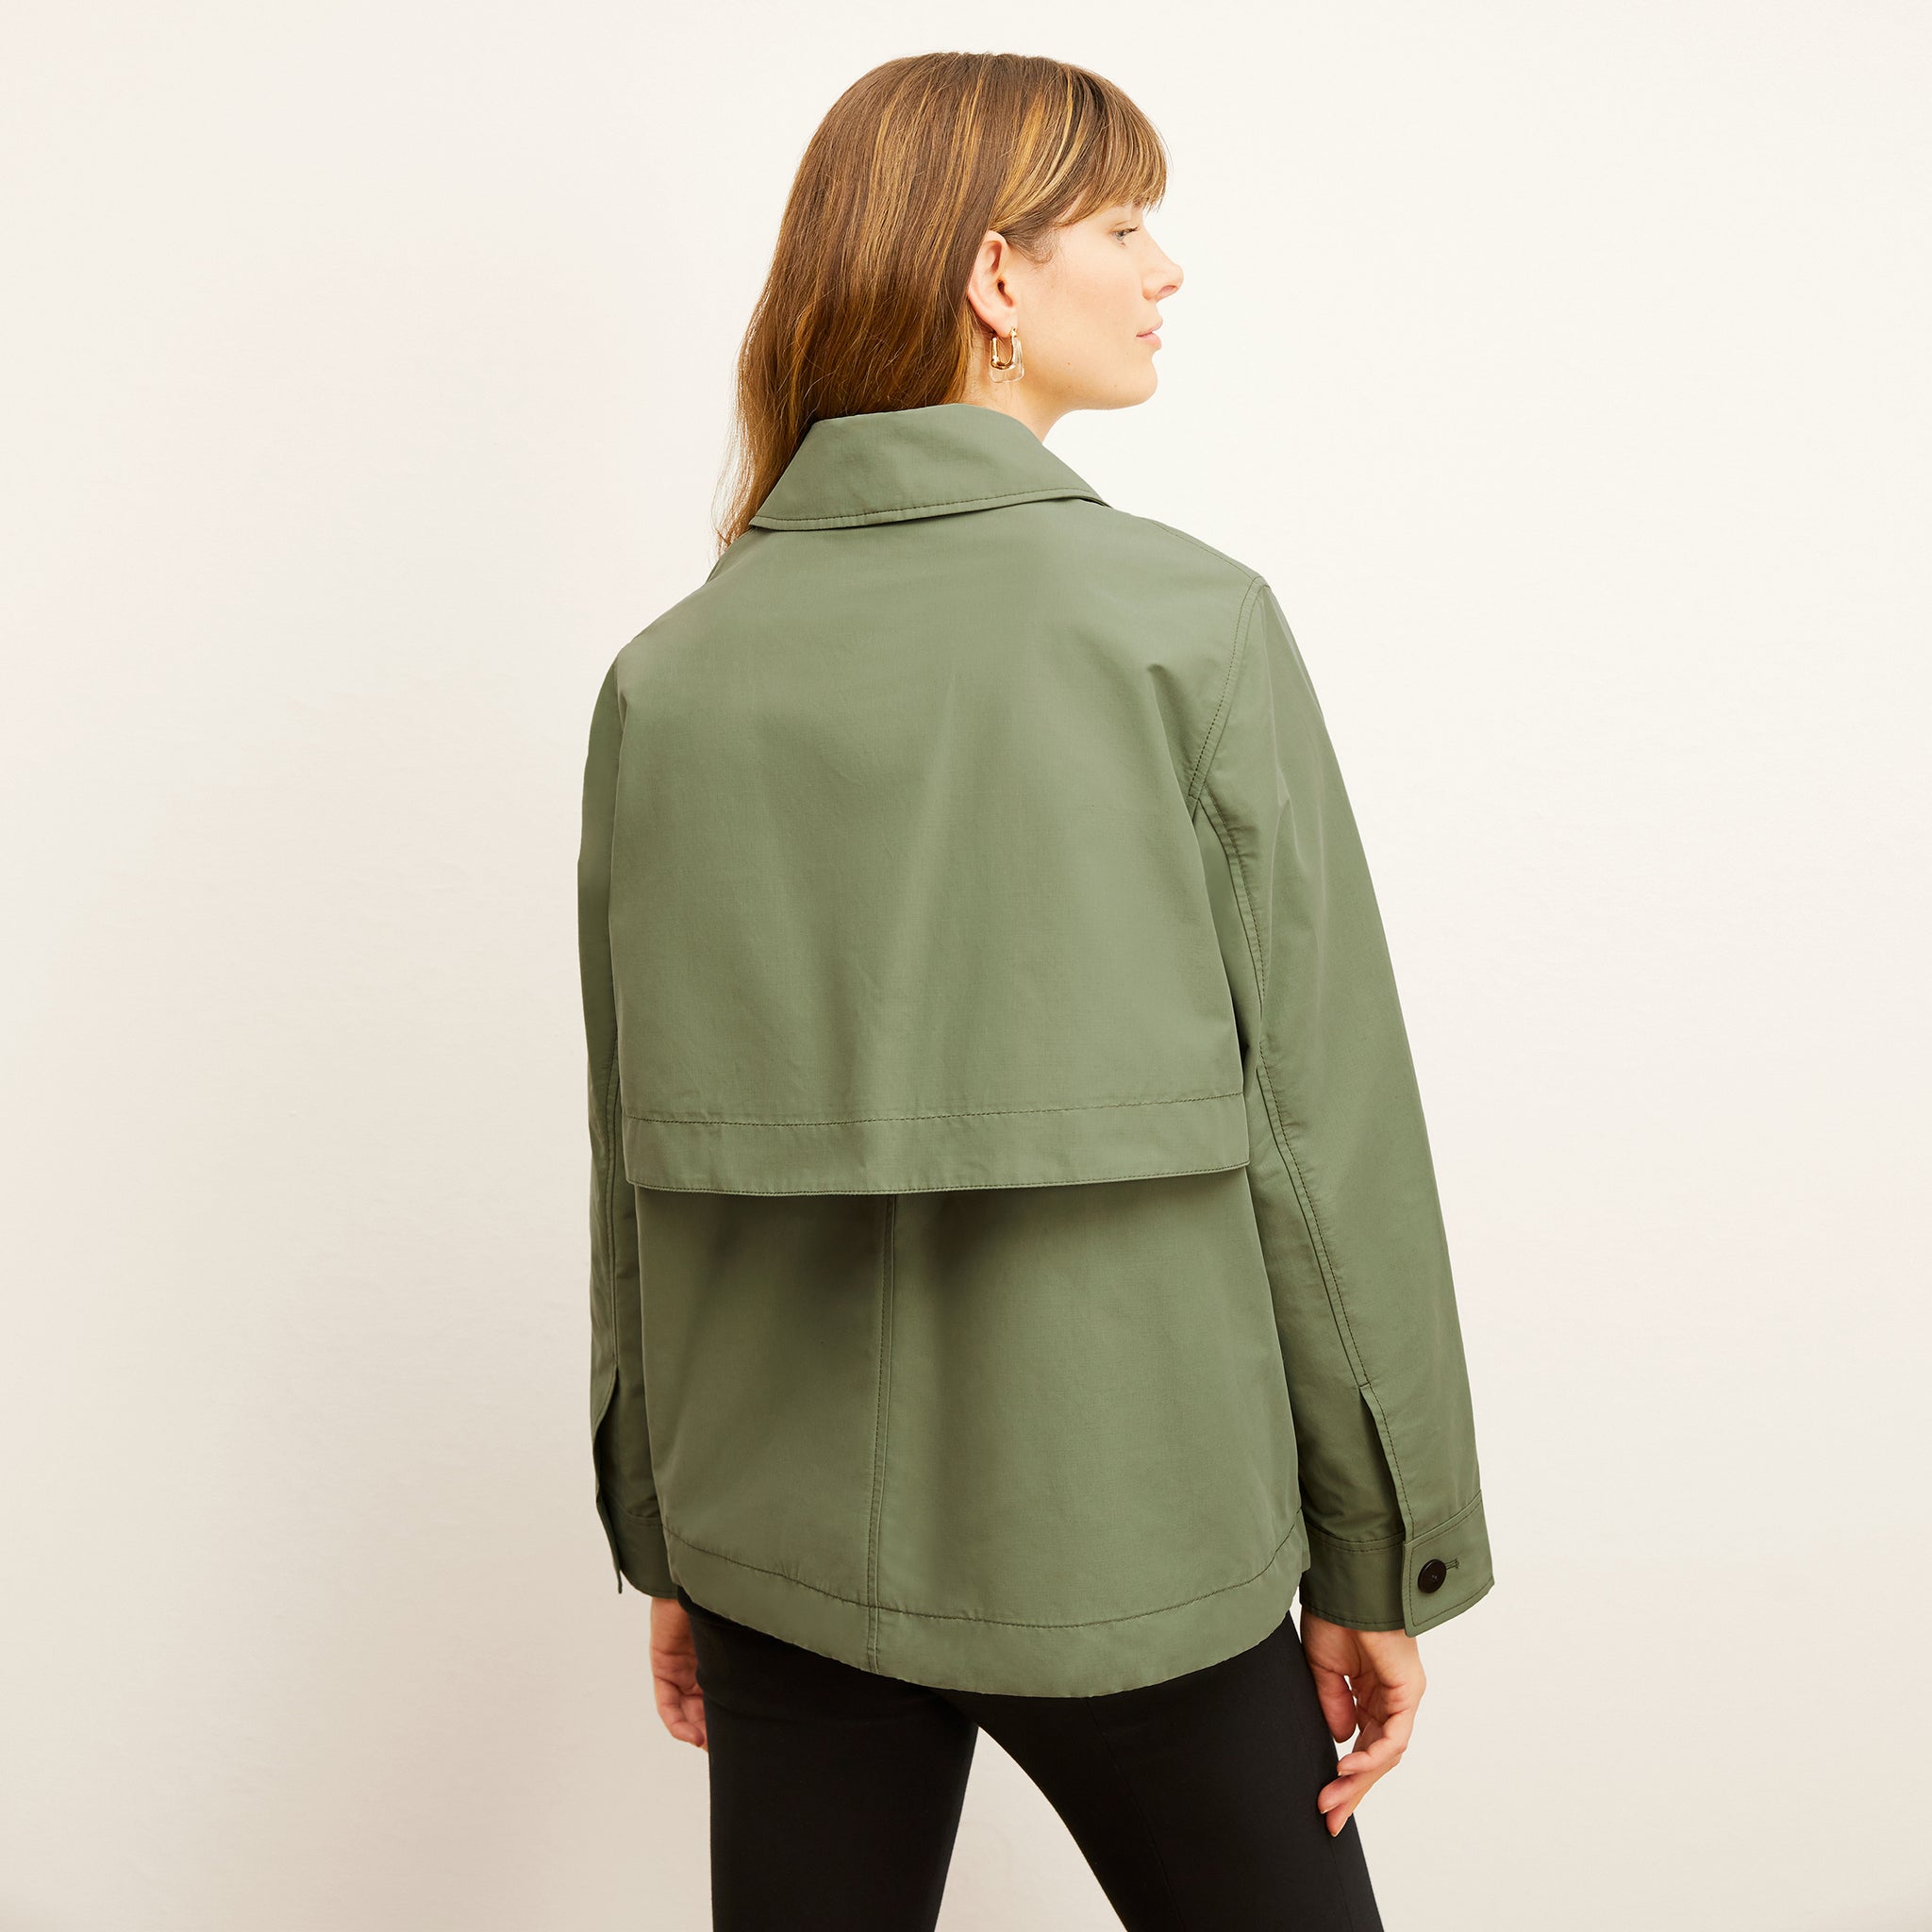 Back image of a woman wearing the Ness Jacket